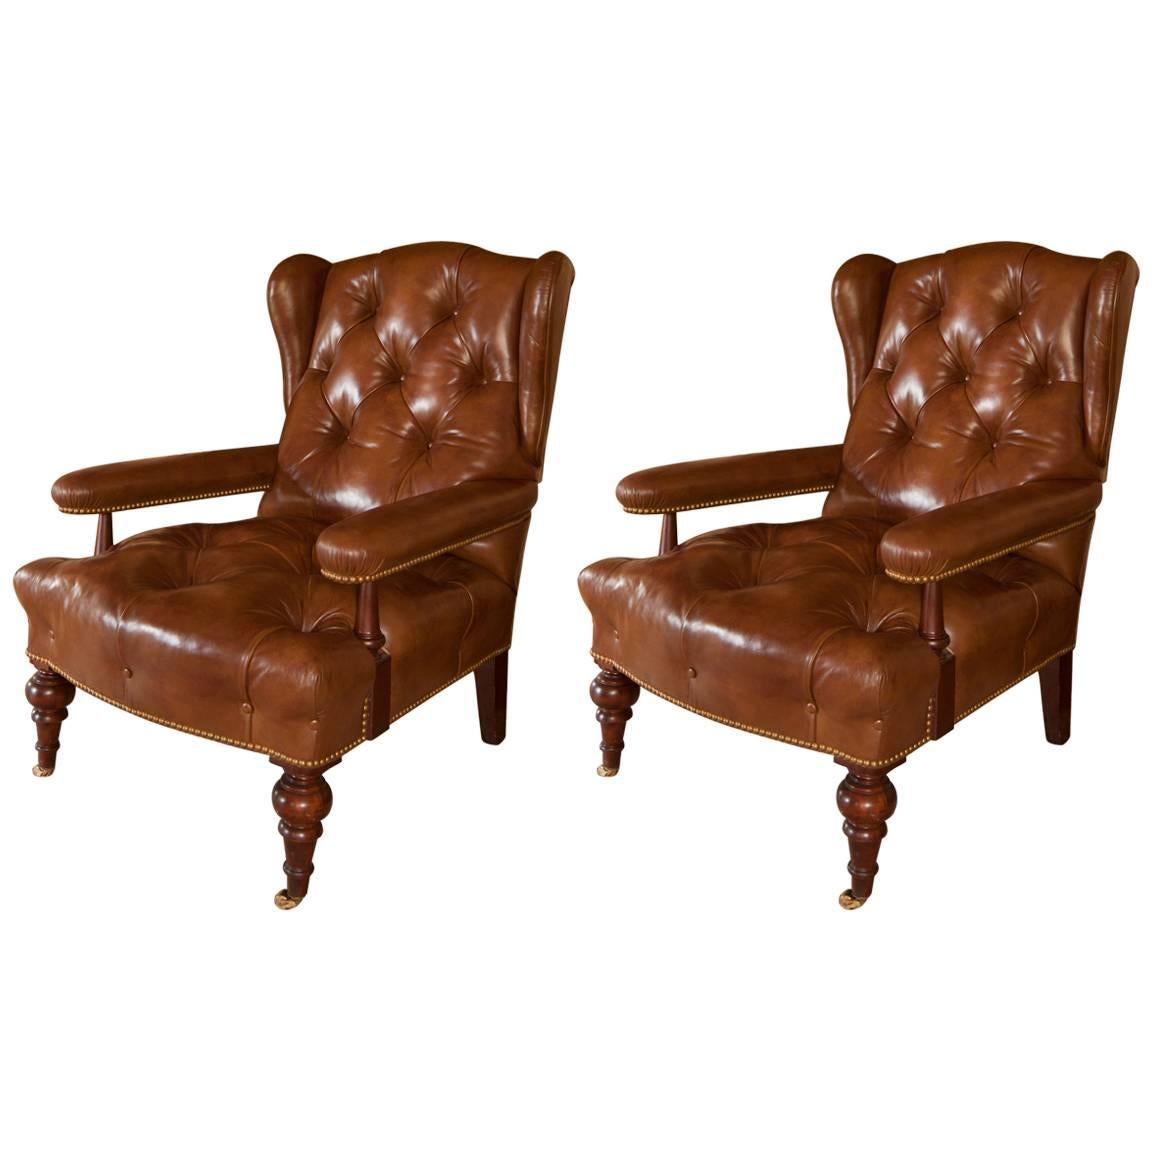 Pair of David Easton Tufted Leather Library Armchairs